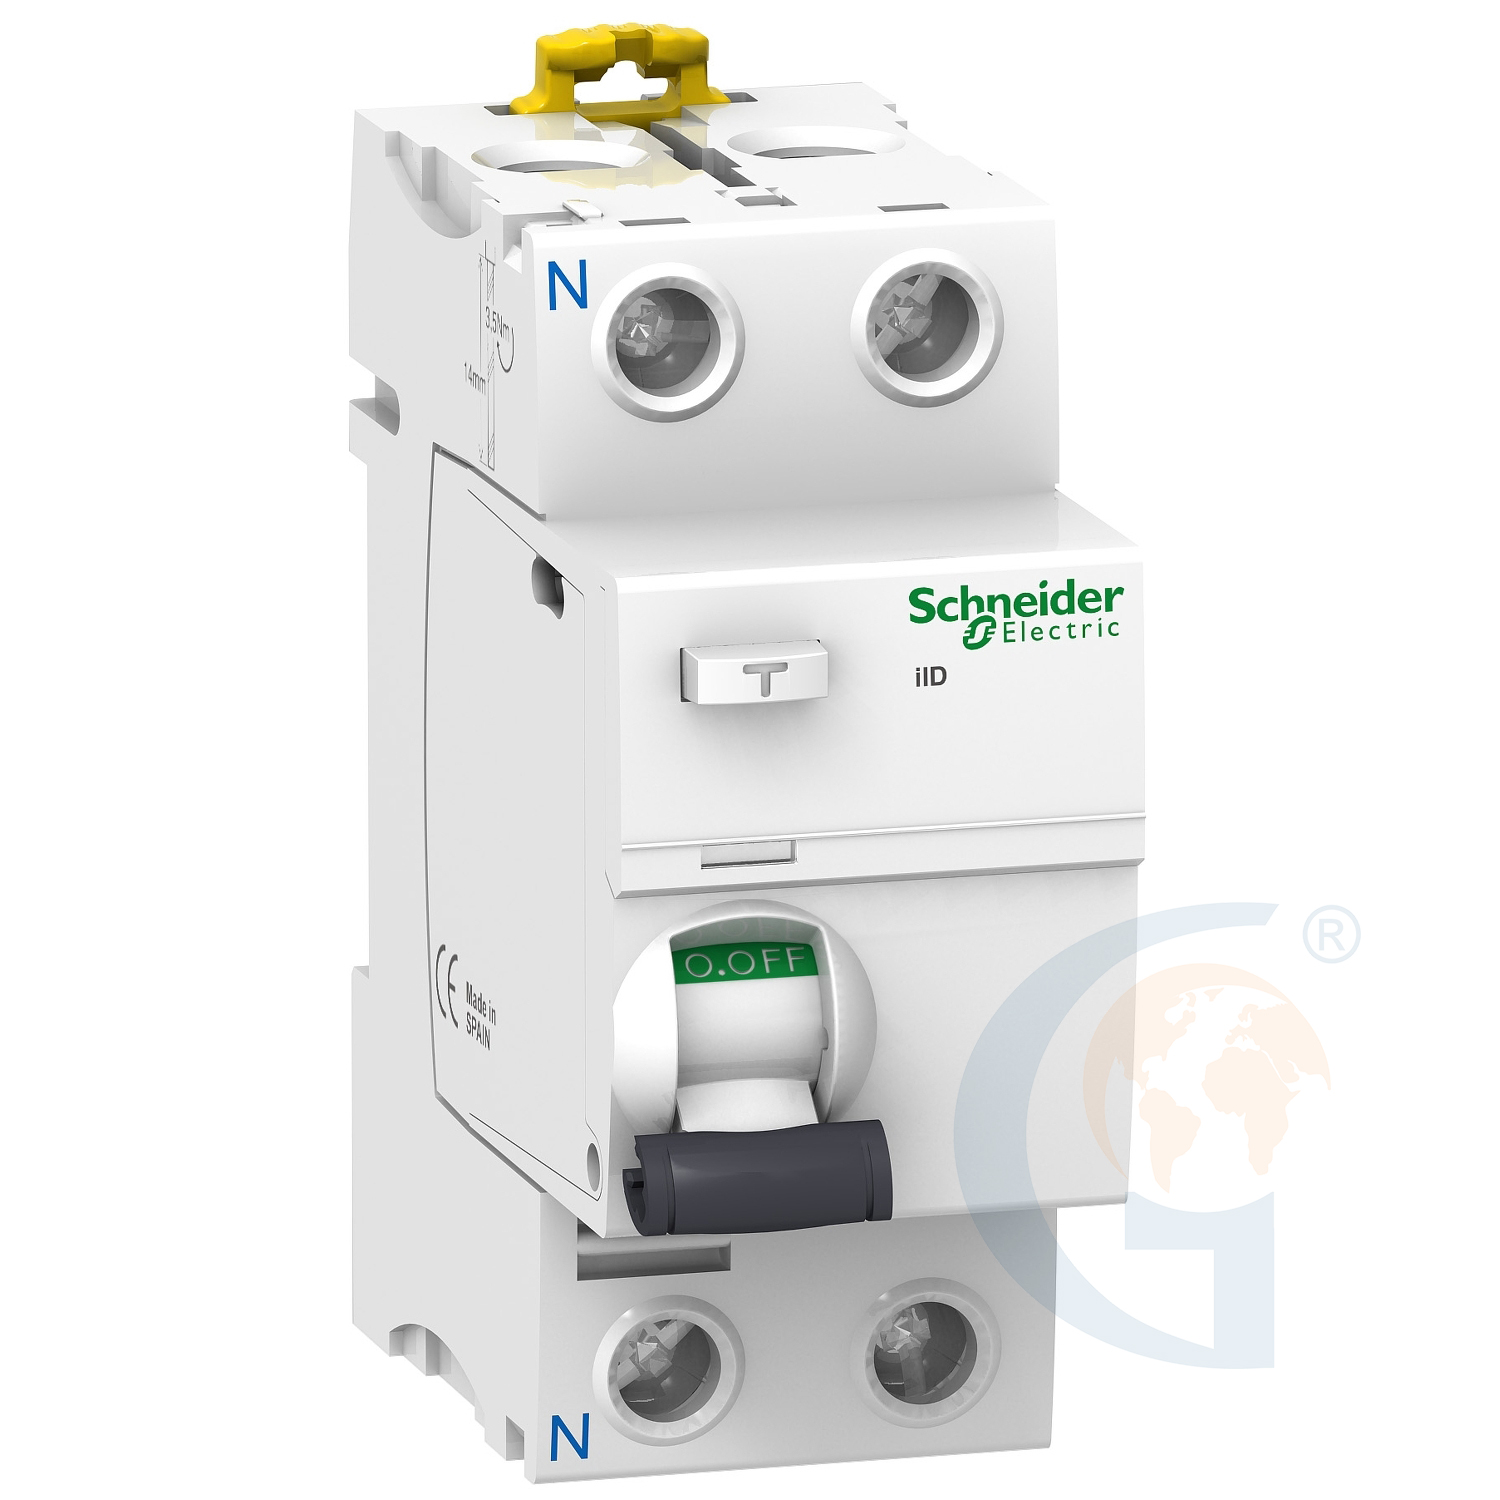 Schneider Electric A9R01225 ACTI 9 IID – RCCB – 2P – 25A – 30MA – TYPE A https://gesrepair.com/wp-content/uploads/2020/Schneider/Schneider_Electric_A9R01225_.jpg